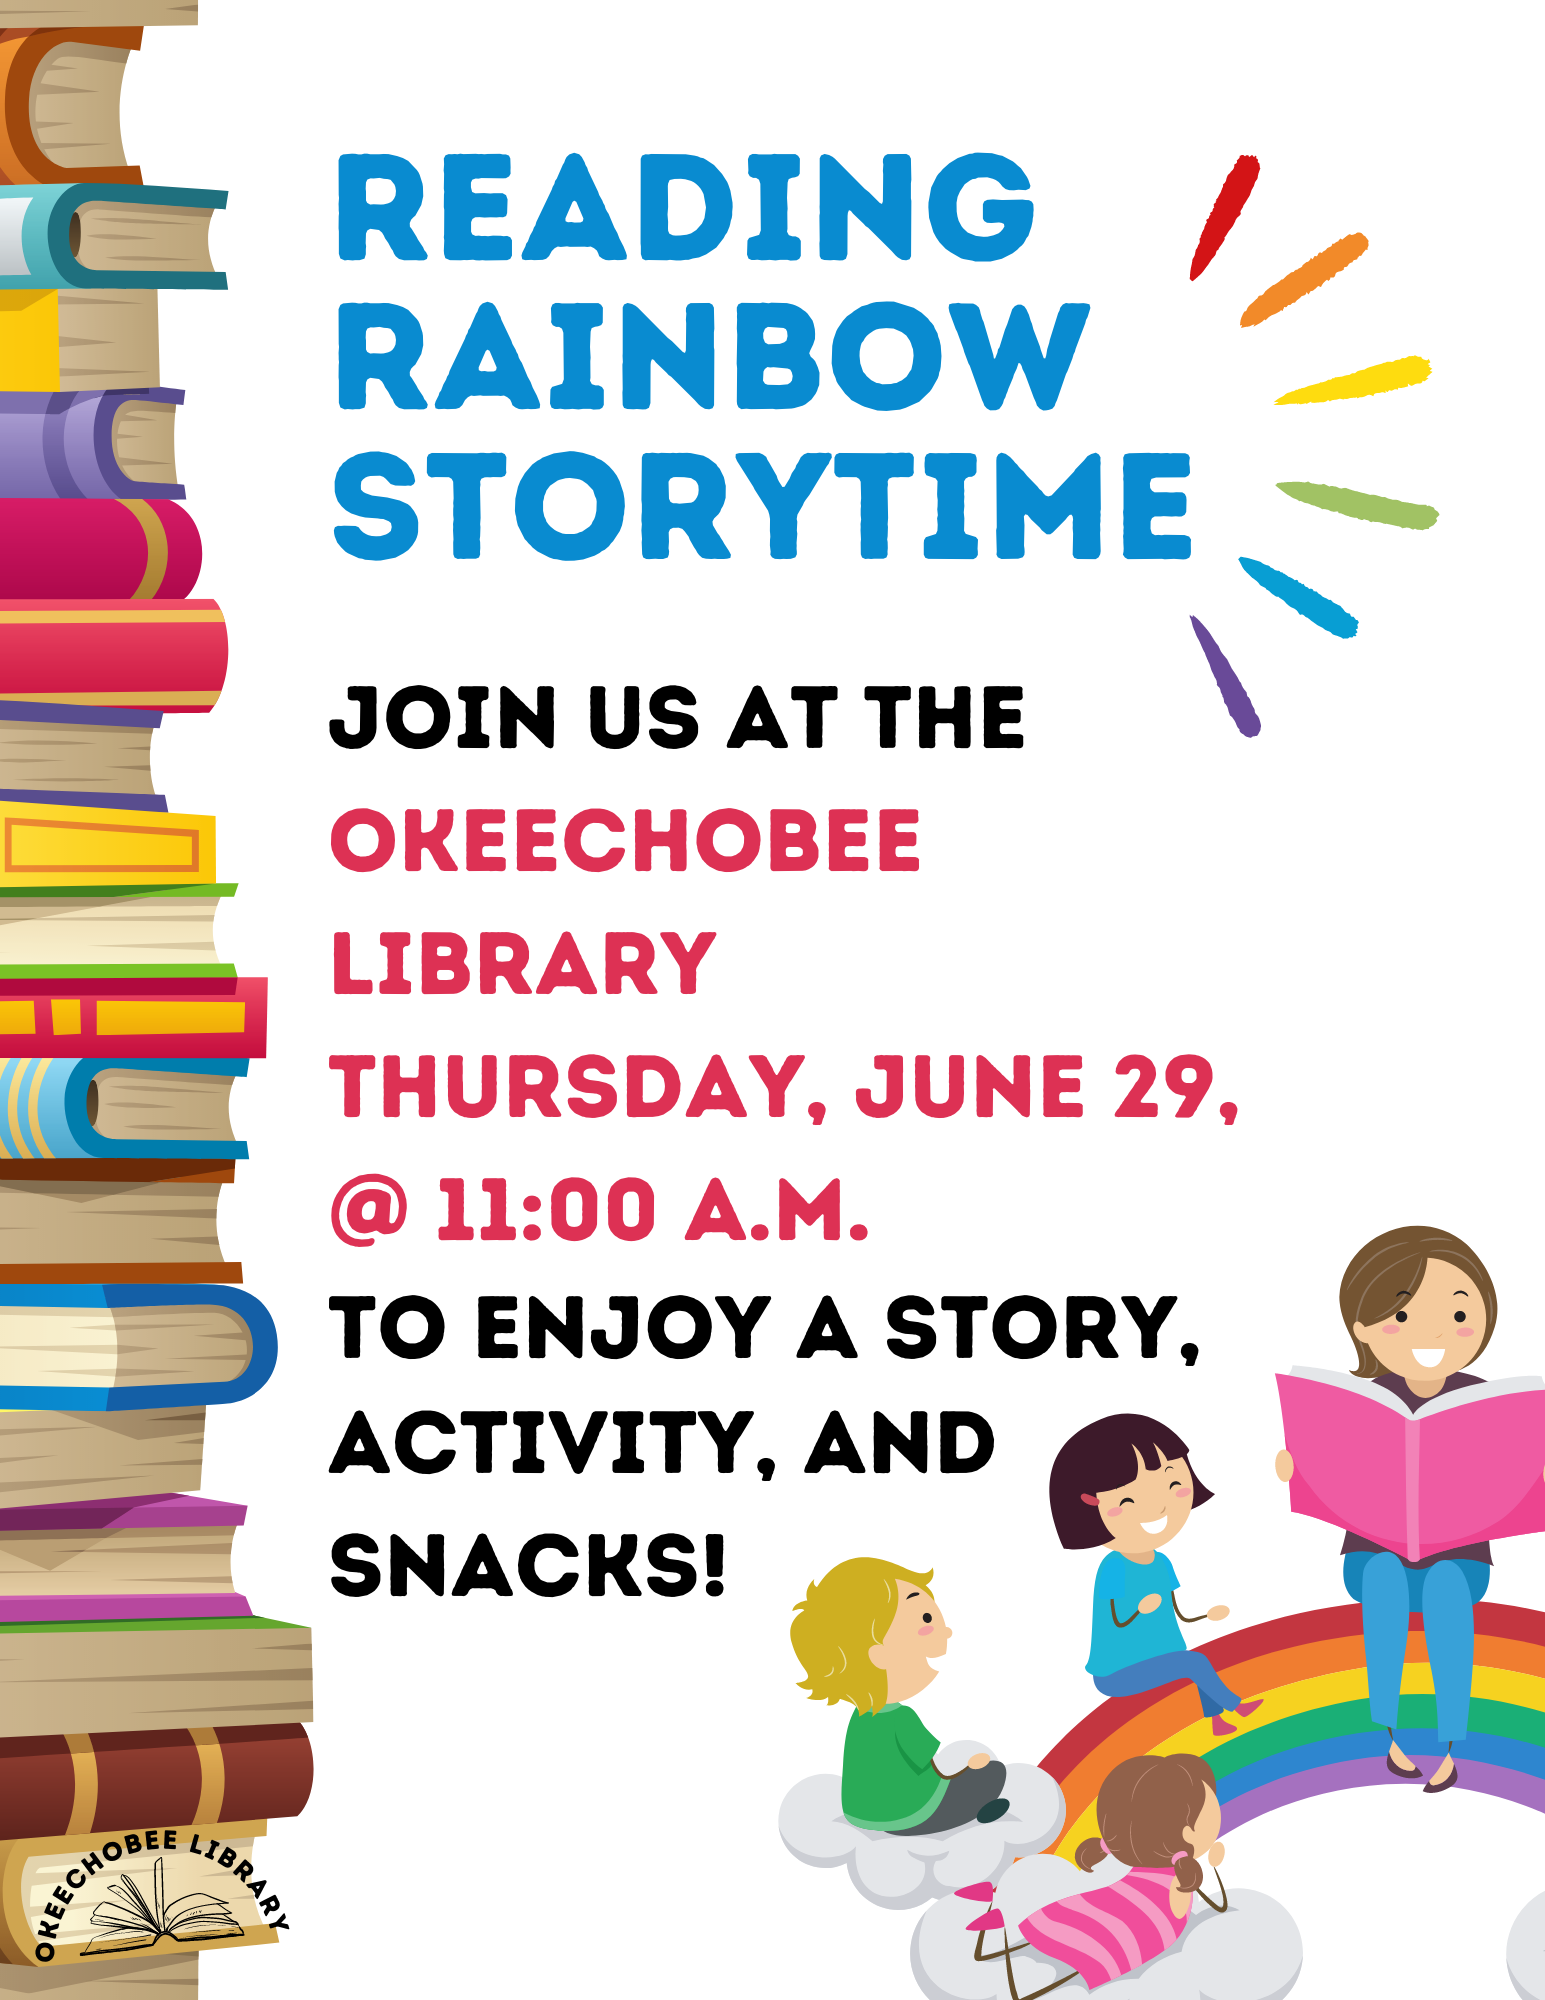 Join us at the Okeechobee Library on June 29th at 11:00 A.M. for our Rainbow Reading Story Time!